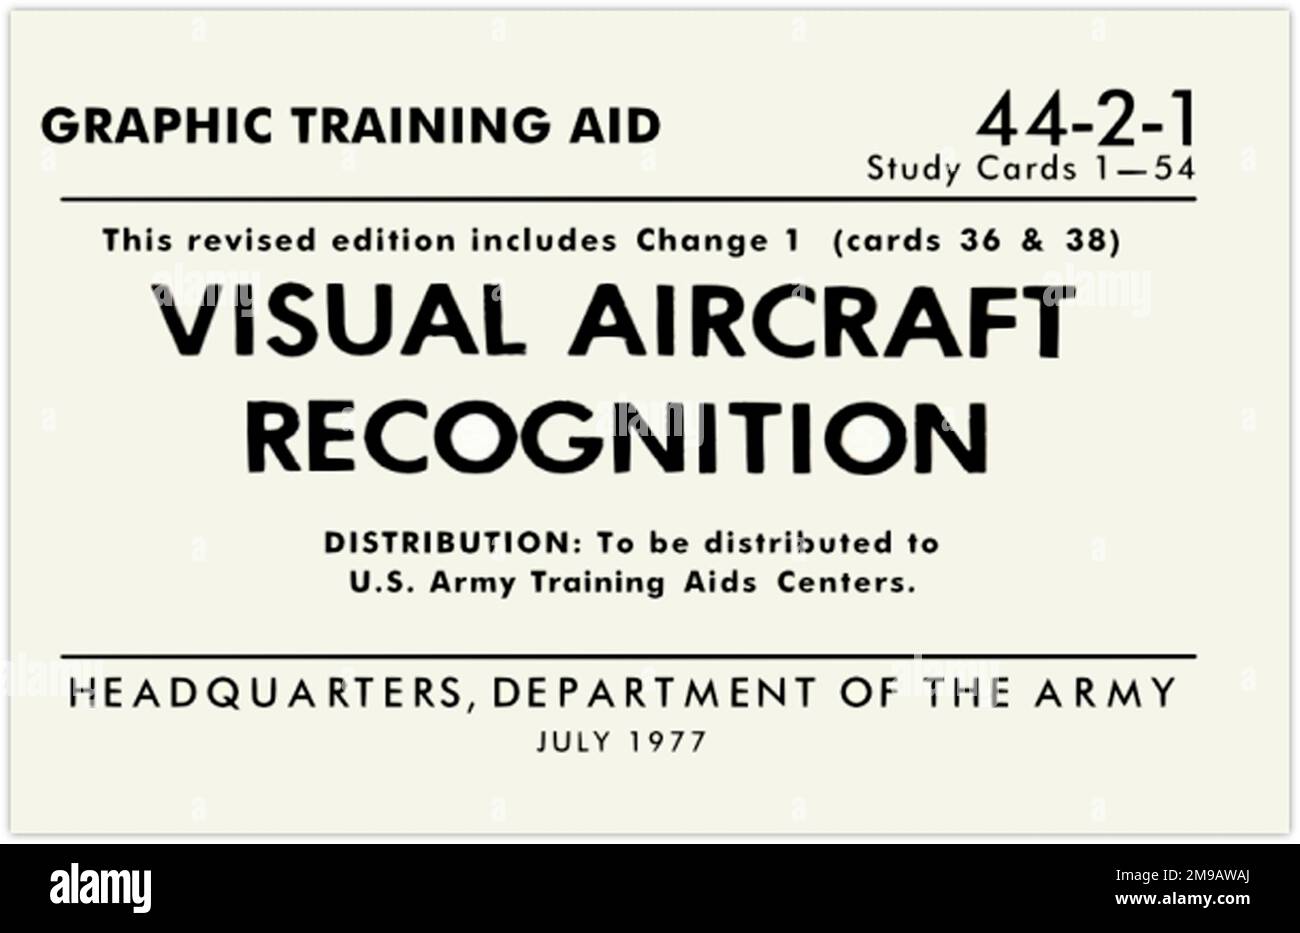 GTA 44-2-1 Cover plate. This is one of the series of Graphics Training Aids (GTA) used by the United States Army to train their personnel to recognize friendly and hostile aircraft. This particular set, GTA 44-2-1, was issued in July1977. The set features aircraft from: Canada, Italy, United Kingdom, United States, and the USSR. Stock Photo